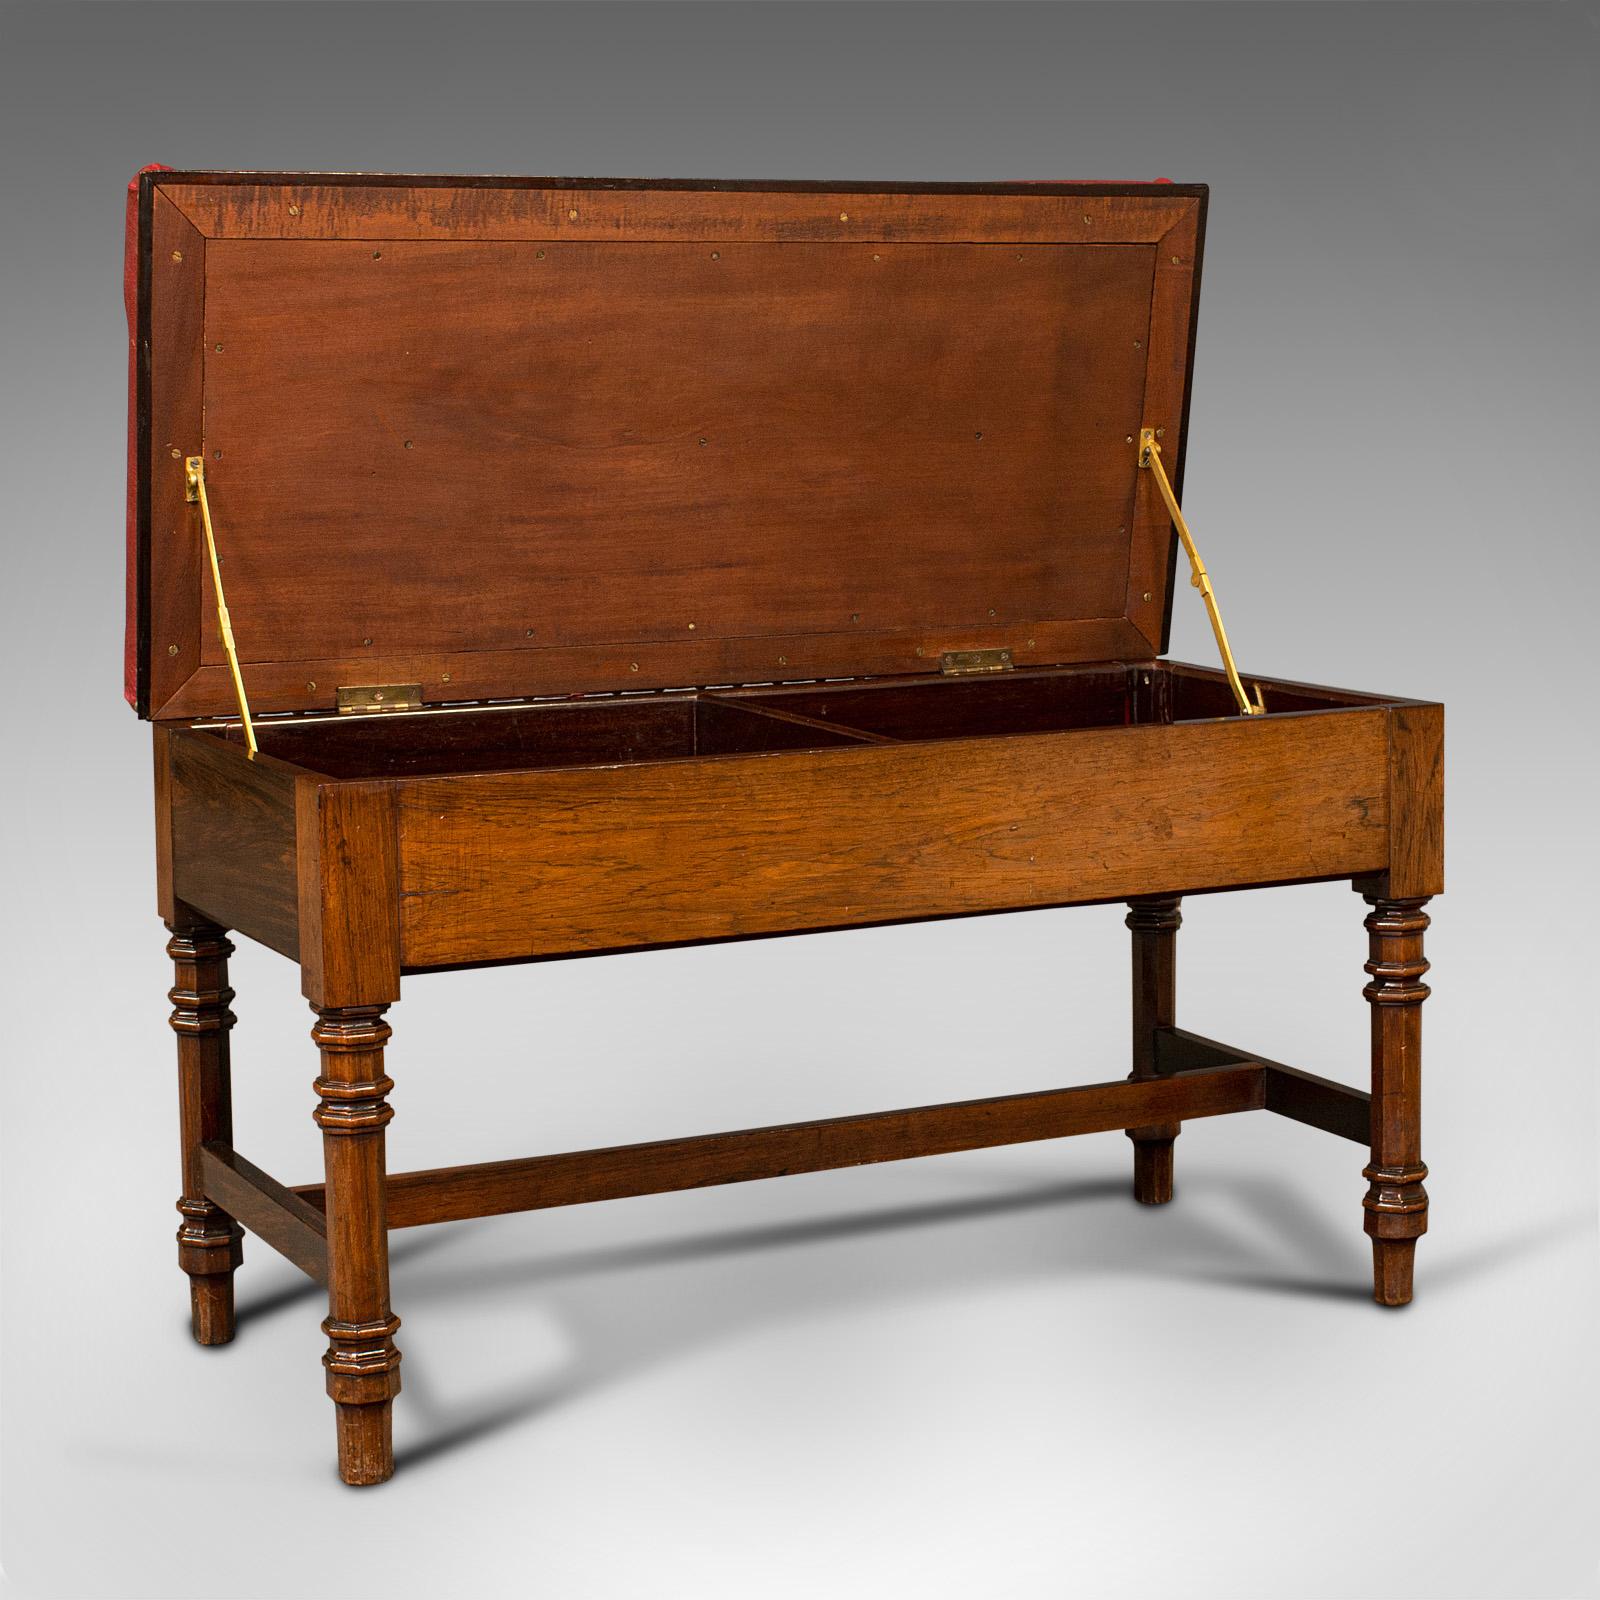 This is an antique duet music stool. An English, rosewood and faux leather recital bench or window seat, dating to the Victorian period, circa 1880.

Attractive and of generous proportion - distinguished and versatile
Displays a desirable aged